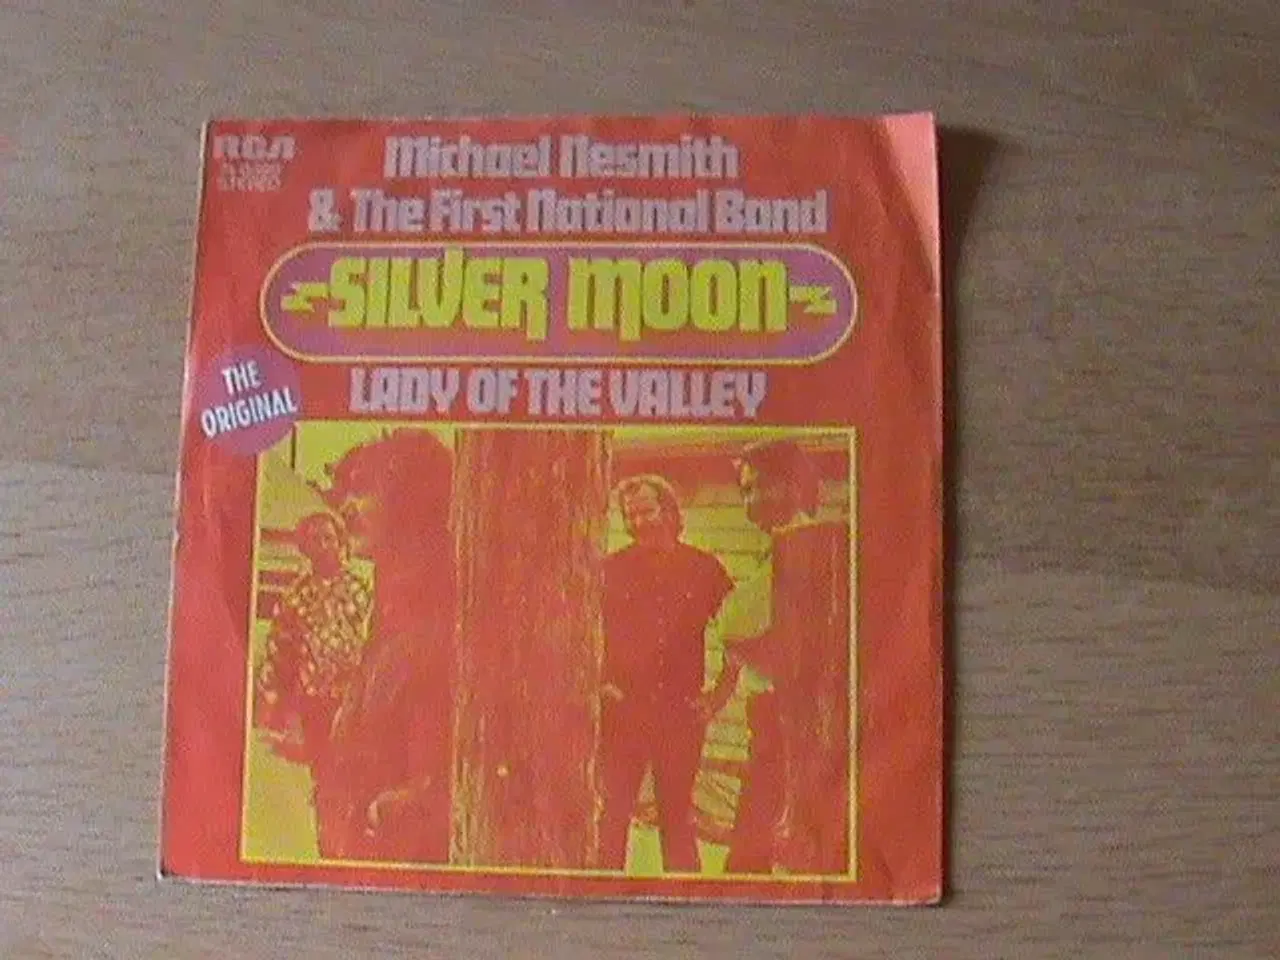 Billede 1 - EP Silver Moon Michael Nesmith & The First N. Band